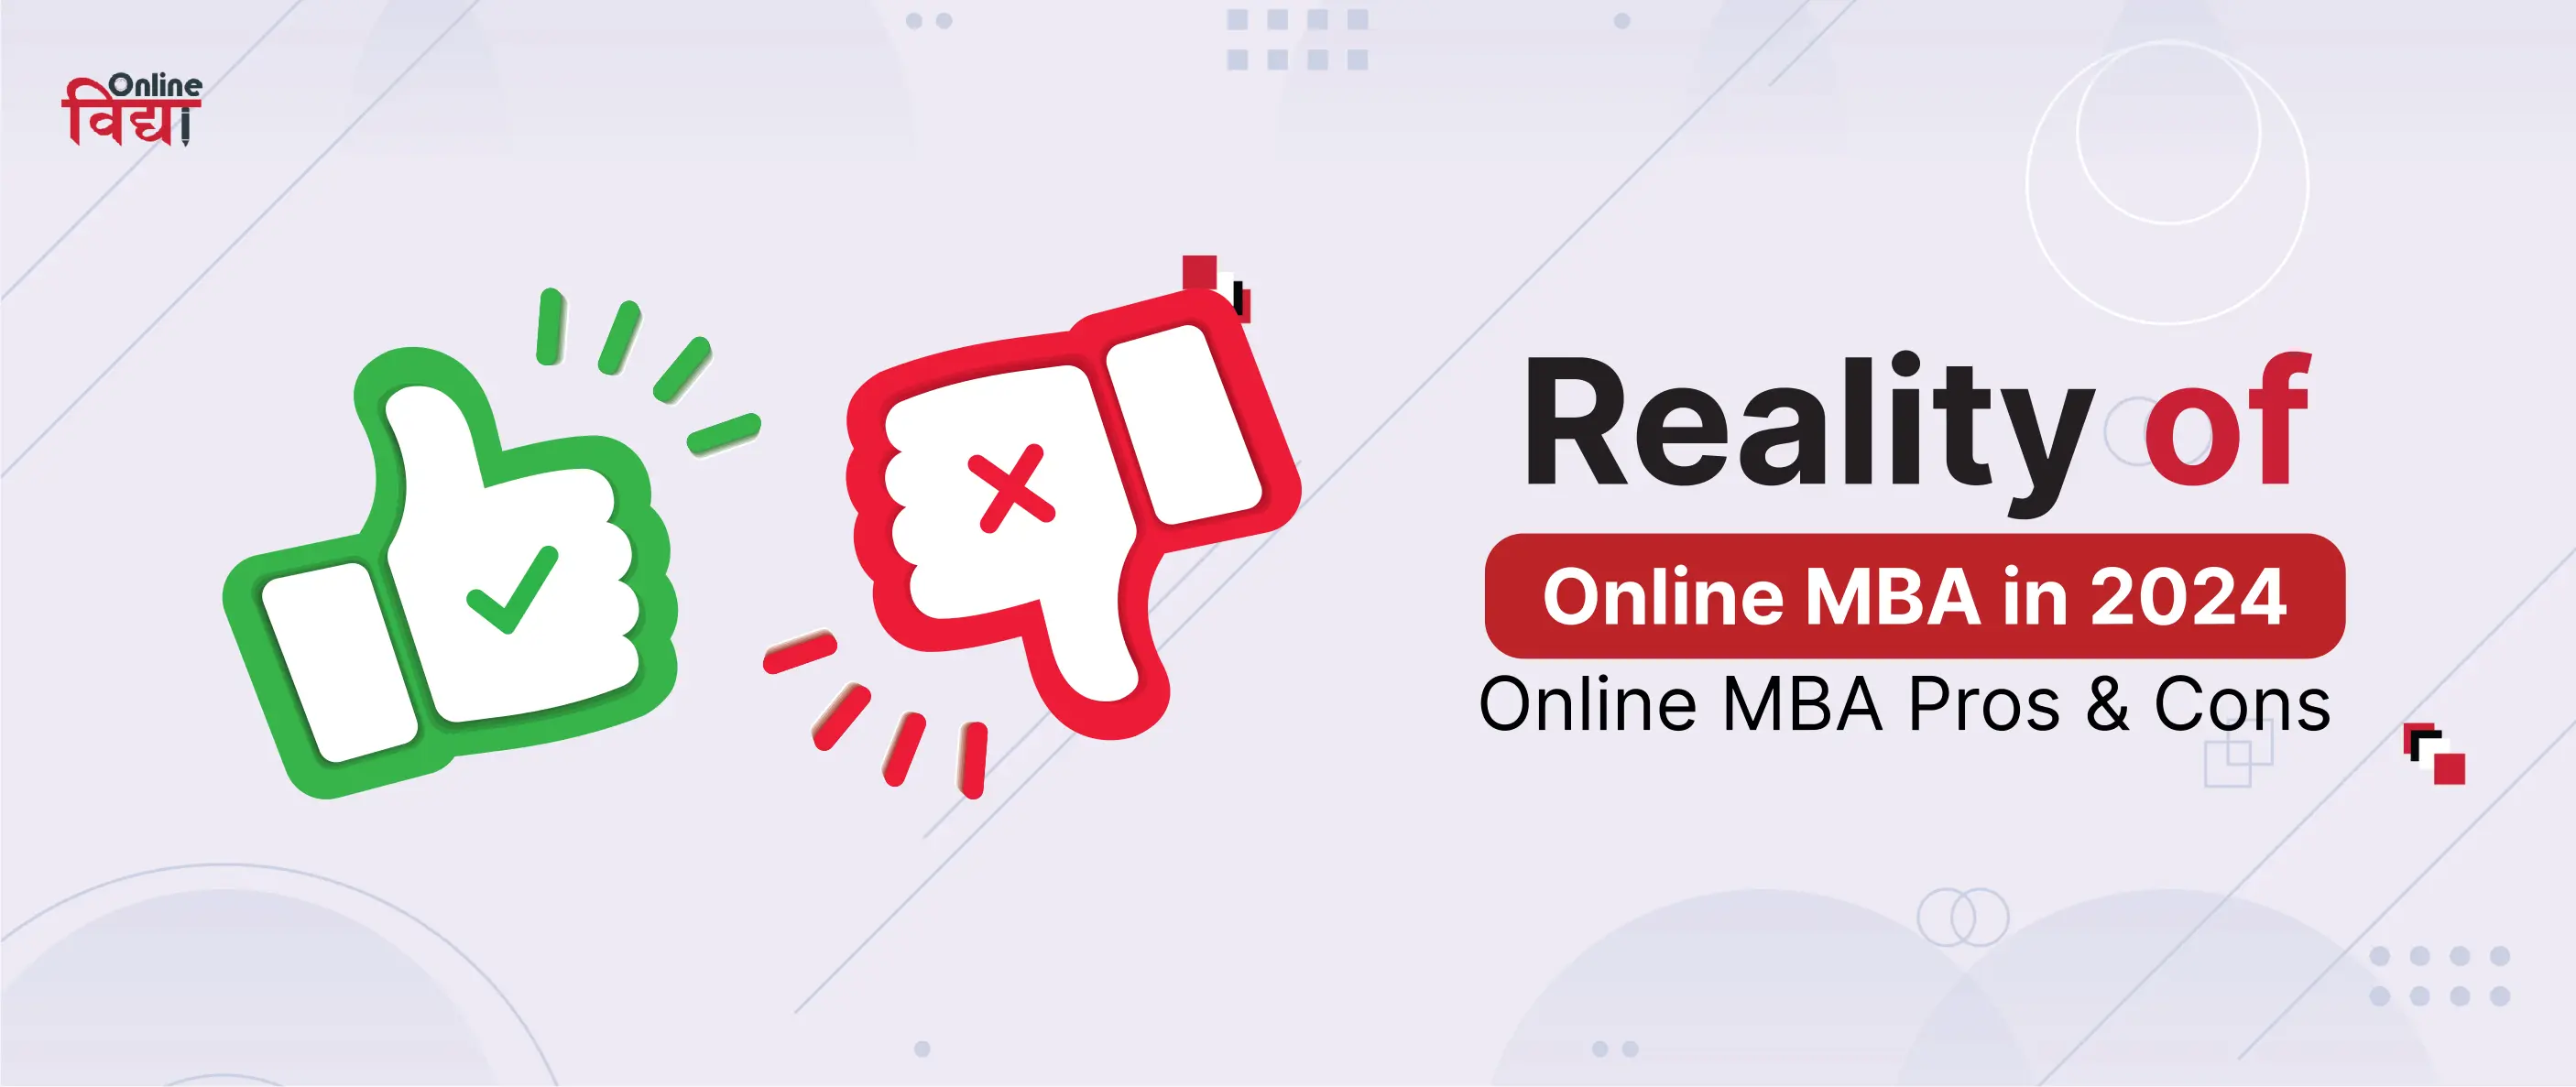 Reality of Online MBA in 2024, Online MBA Pros & Cons